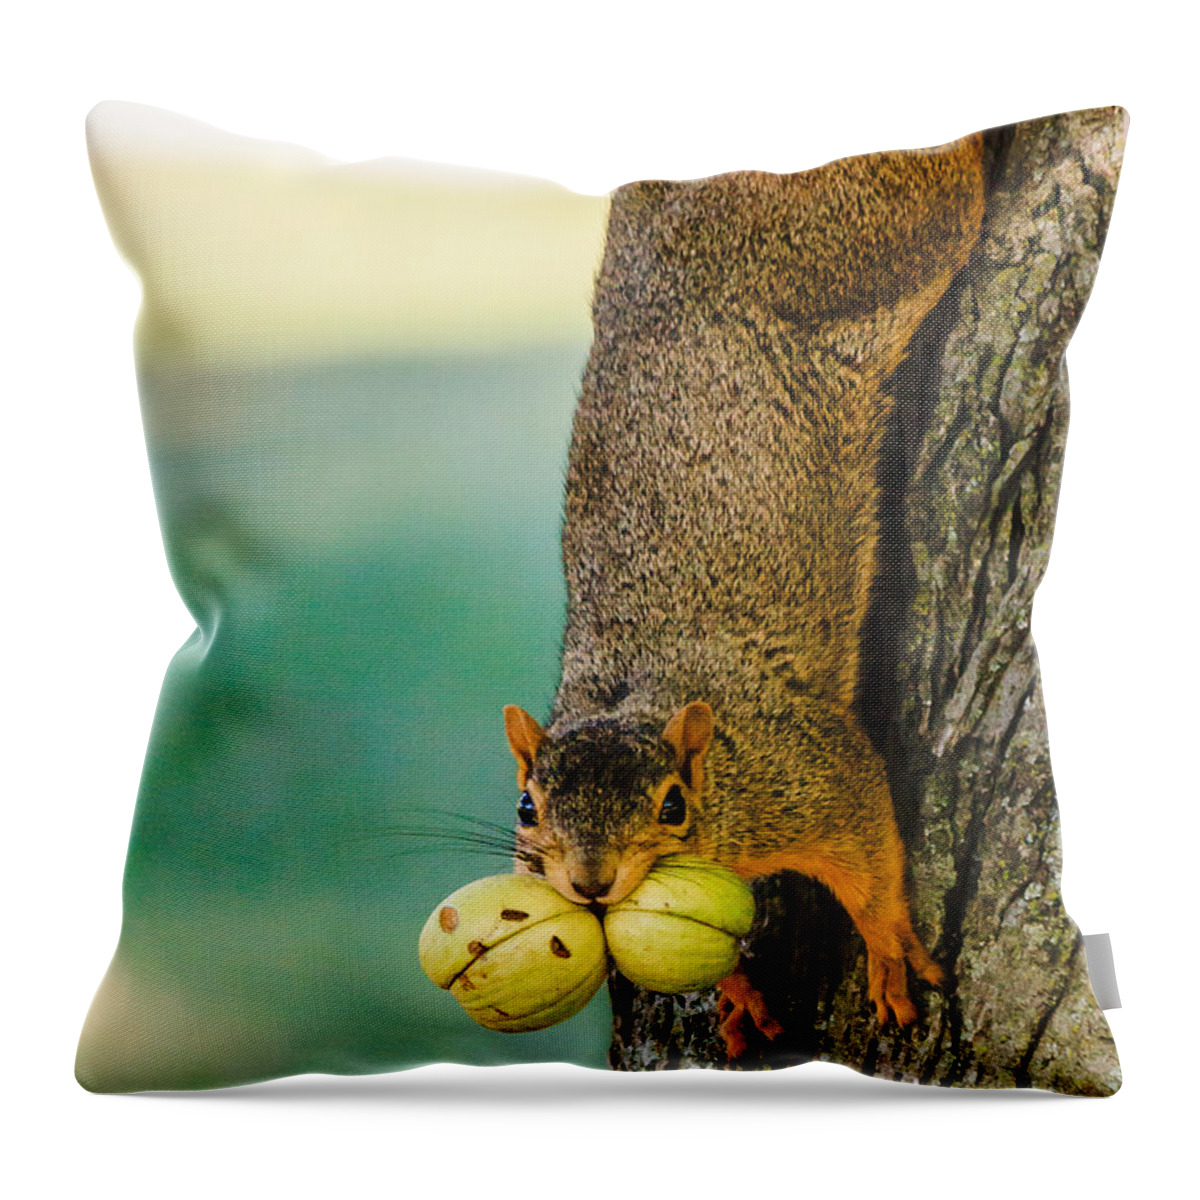 Humorous Throw Pillow featuring the photograph One Nut is Never Enough by Joni Eskridge